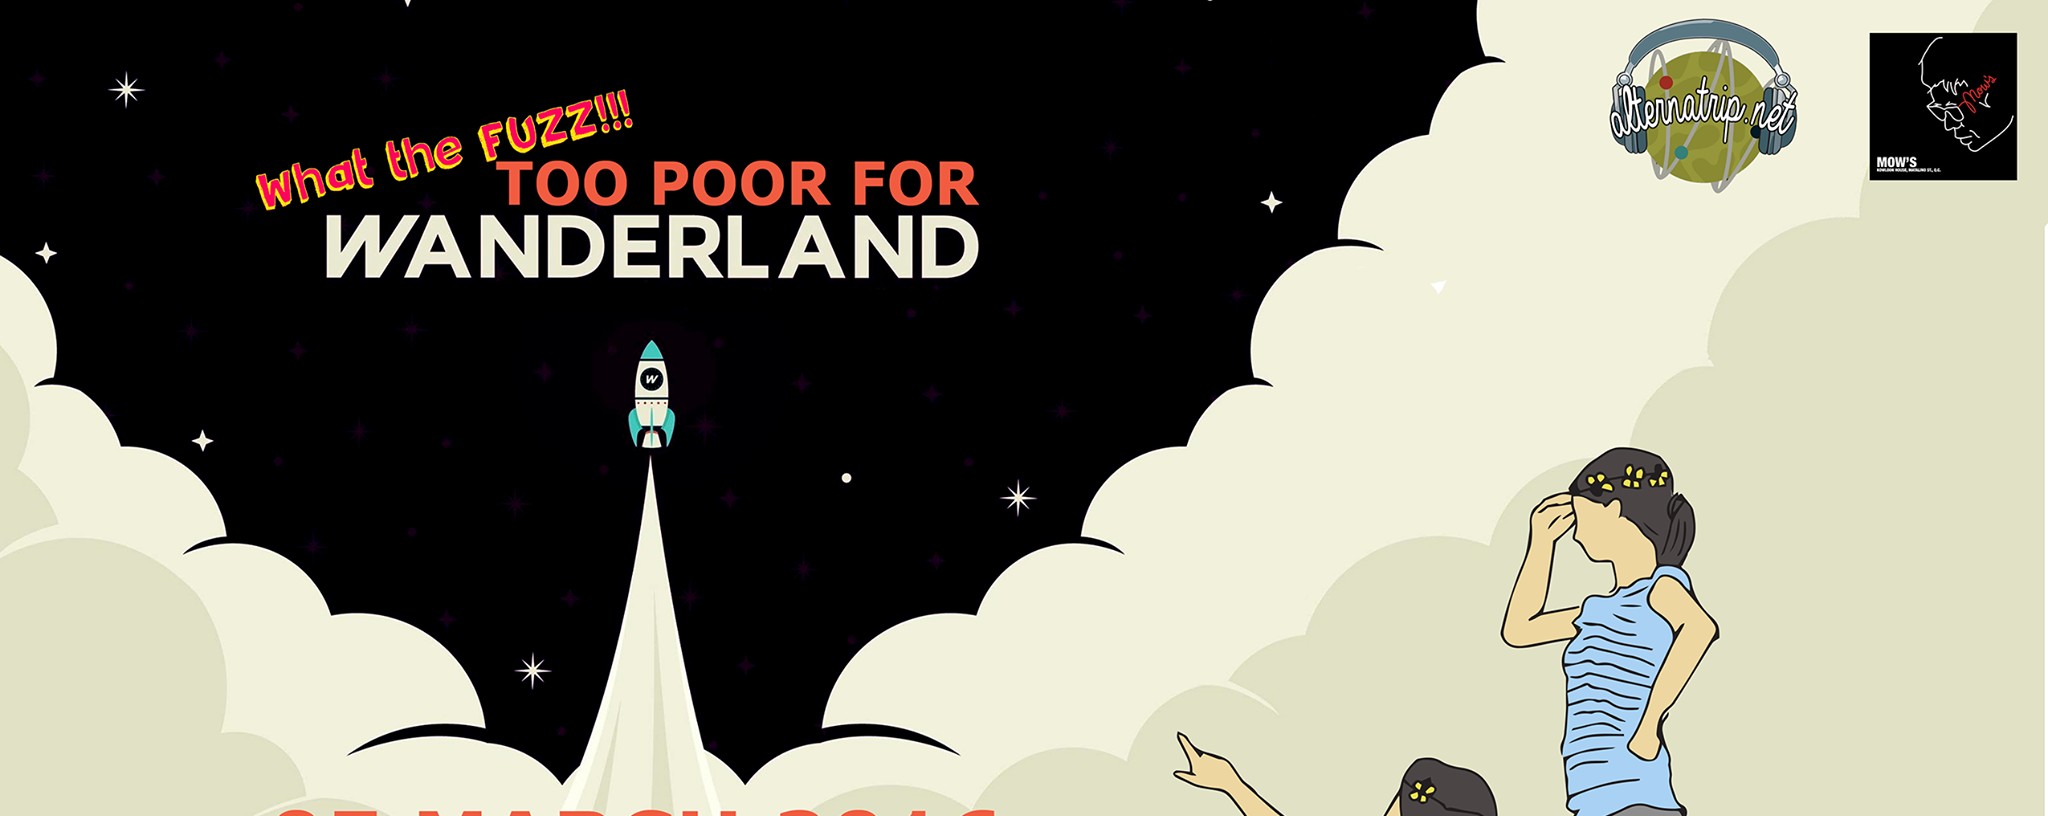 What The Fuzz 2: Too Poor For Wanderland